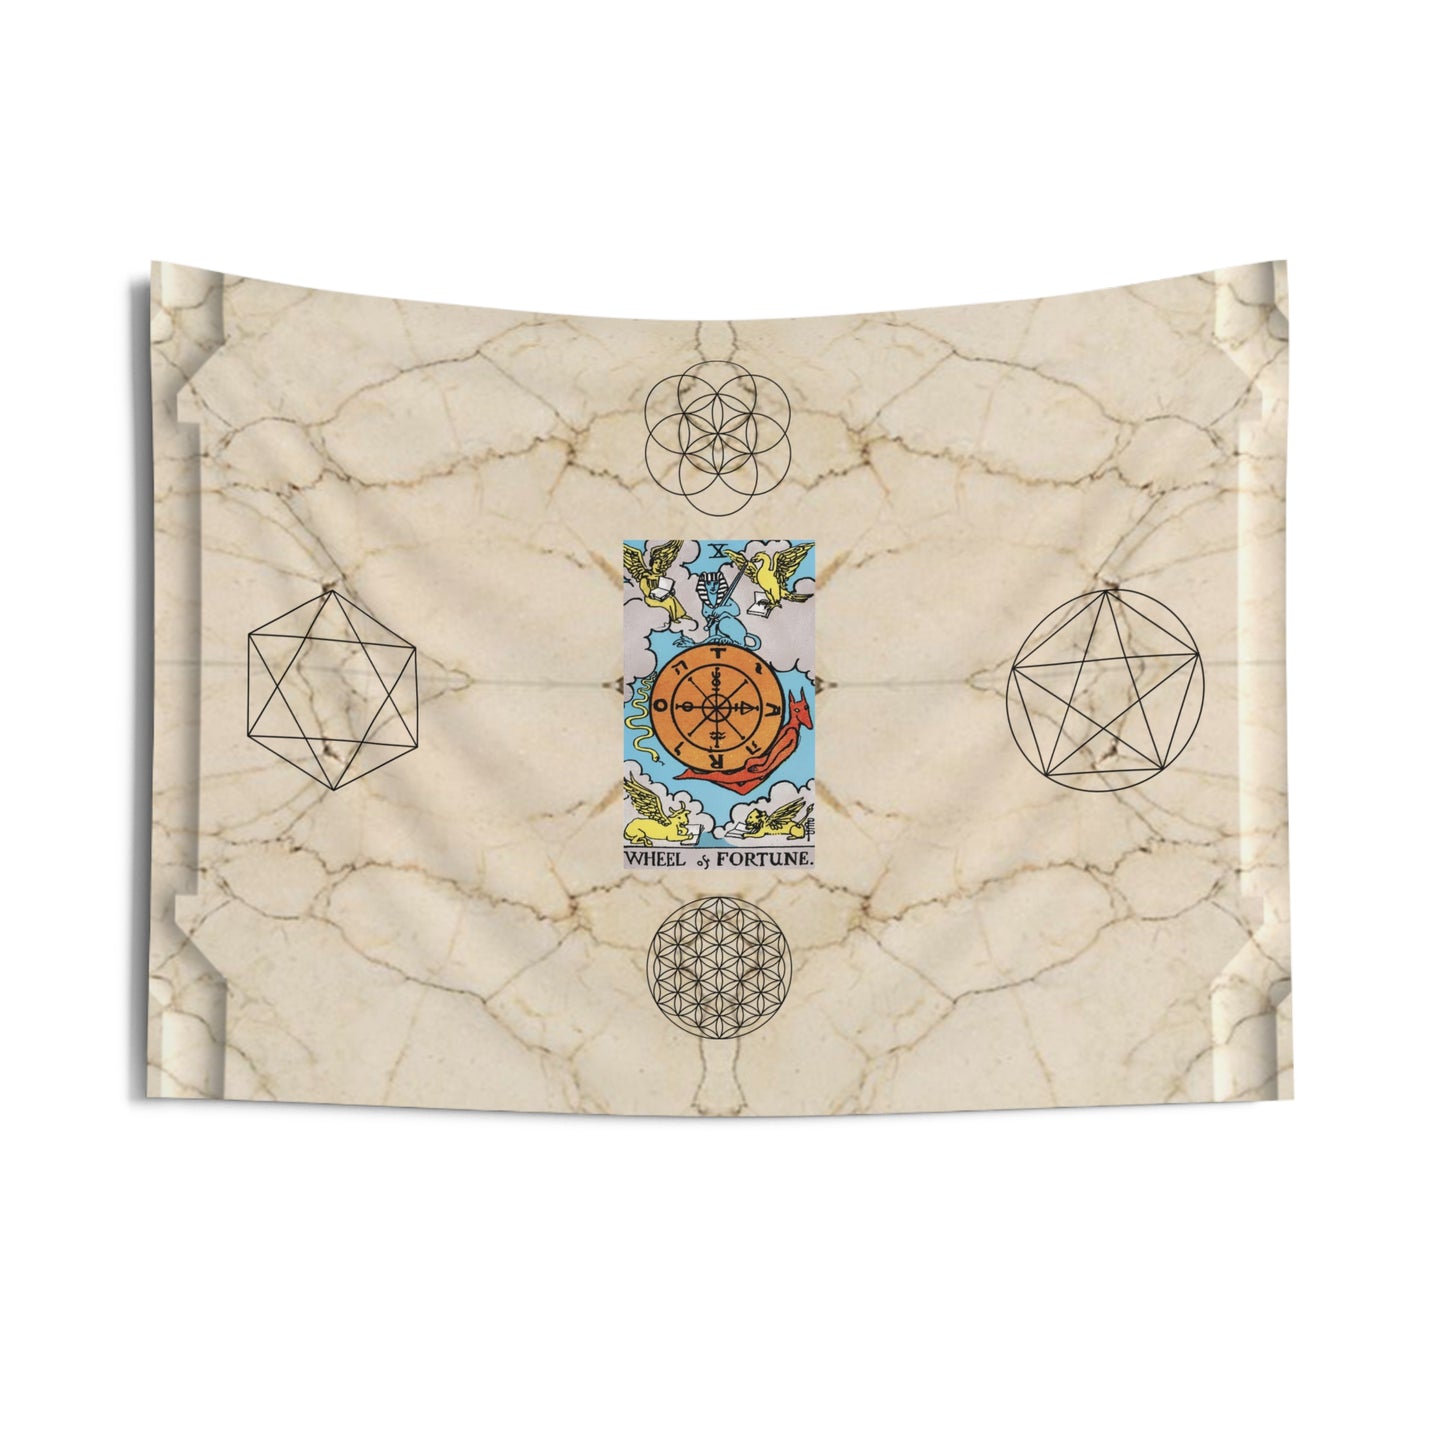 The Wheel of Fortune Tarot Card Altar Cloth or Tapestry with Marble Background, Flower of Life and Seed of Life